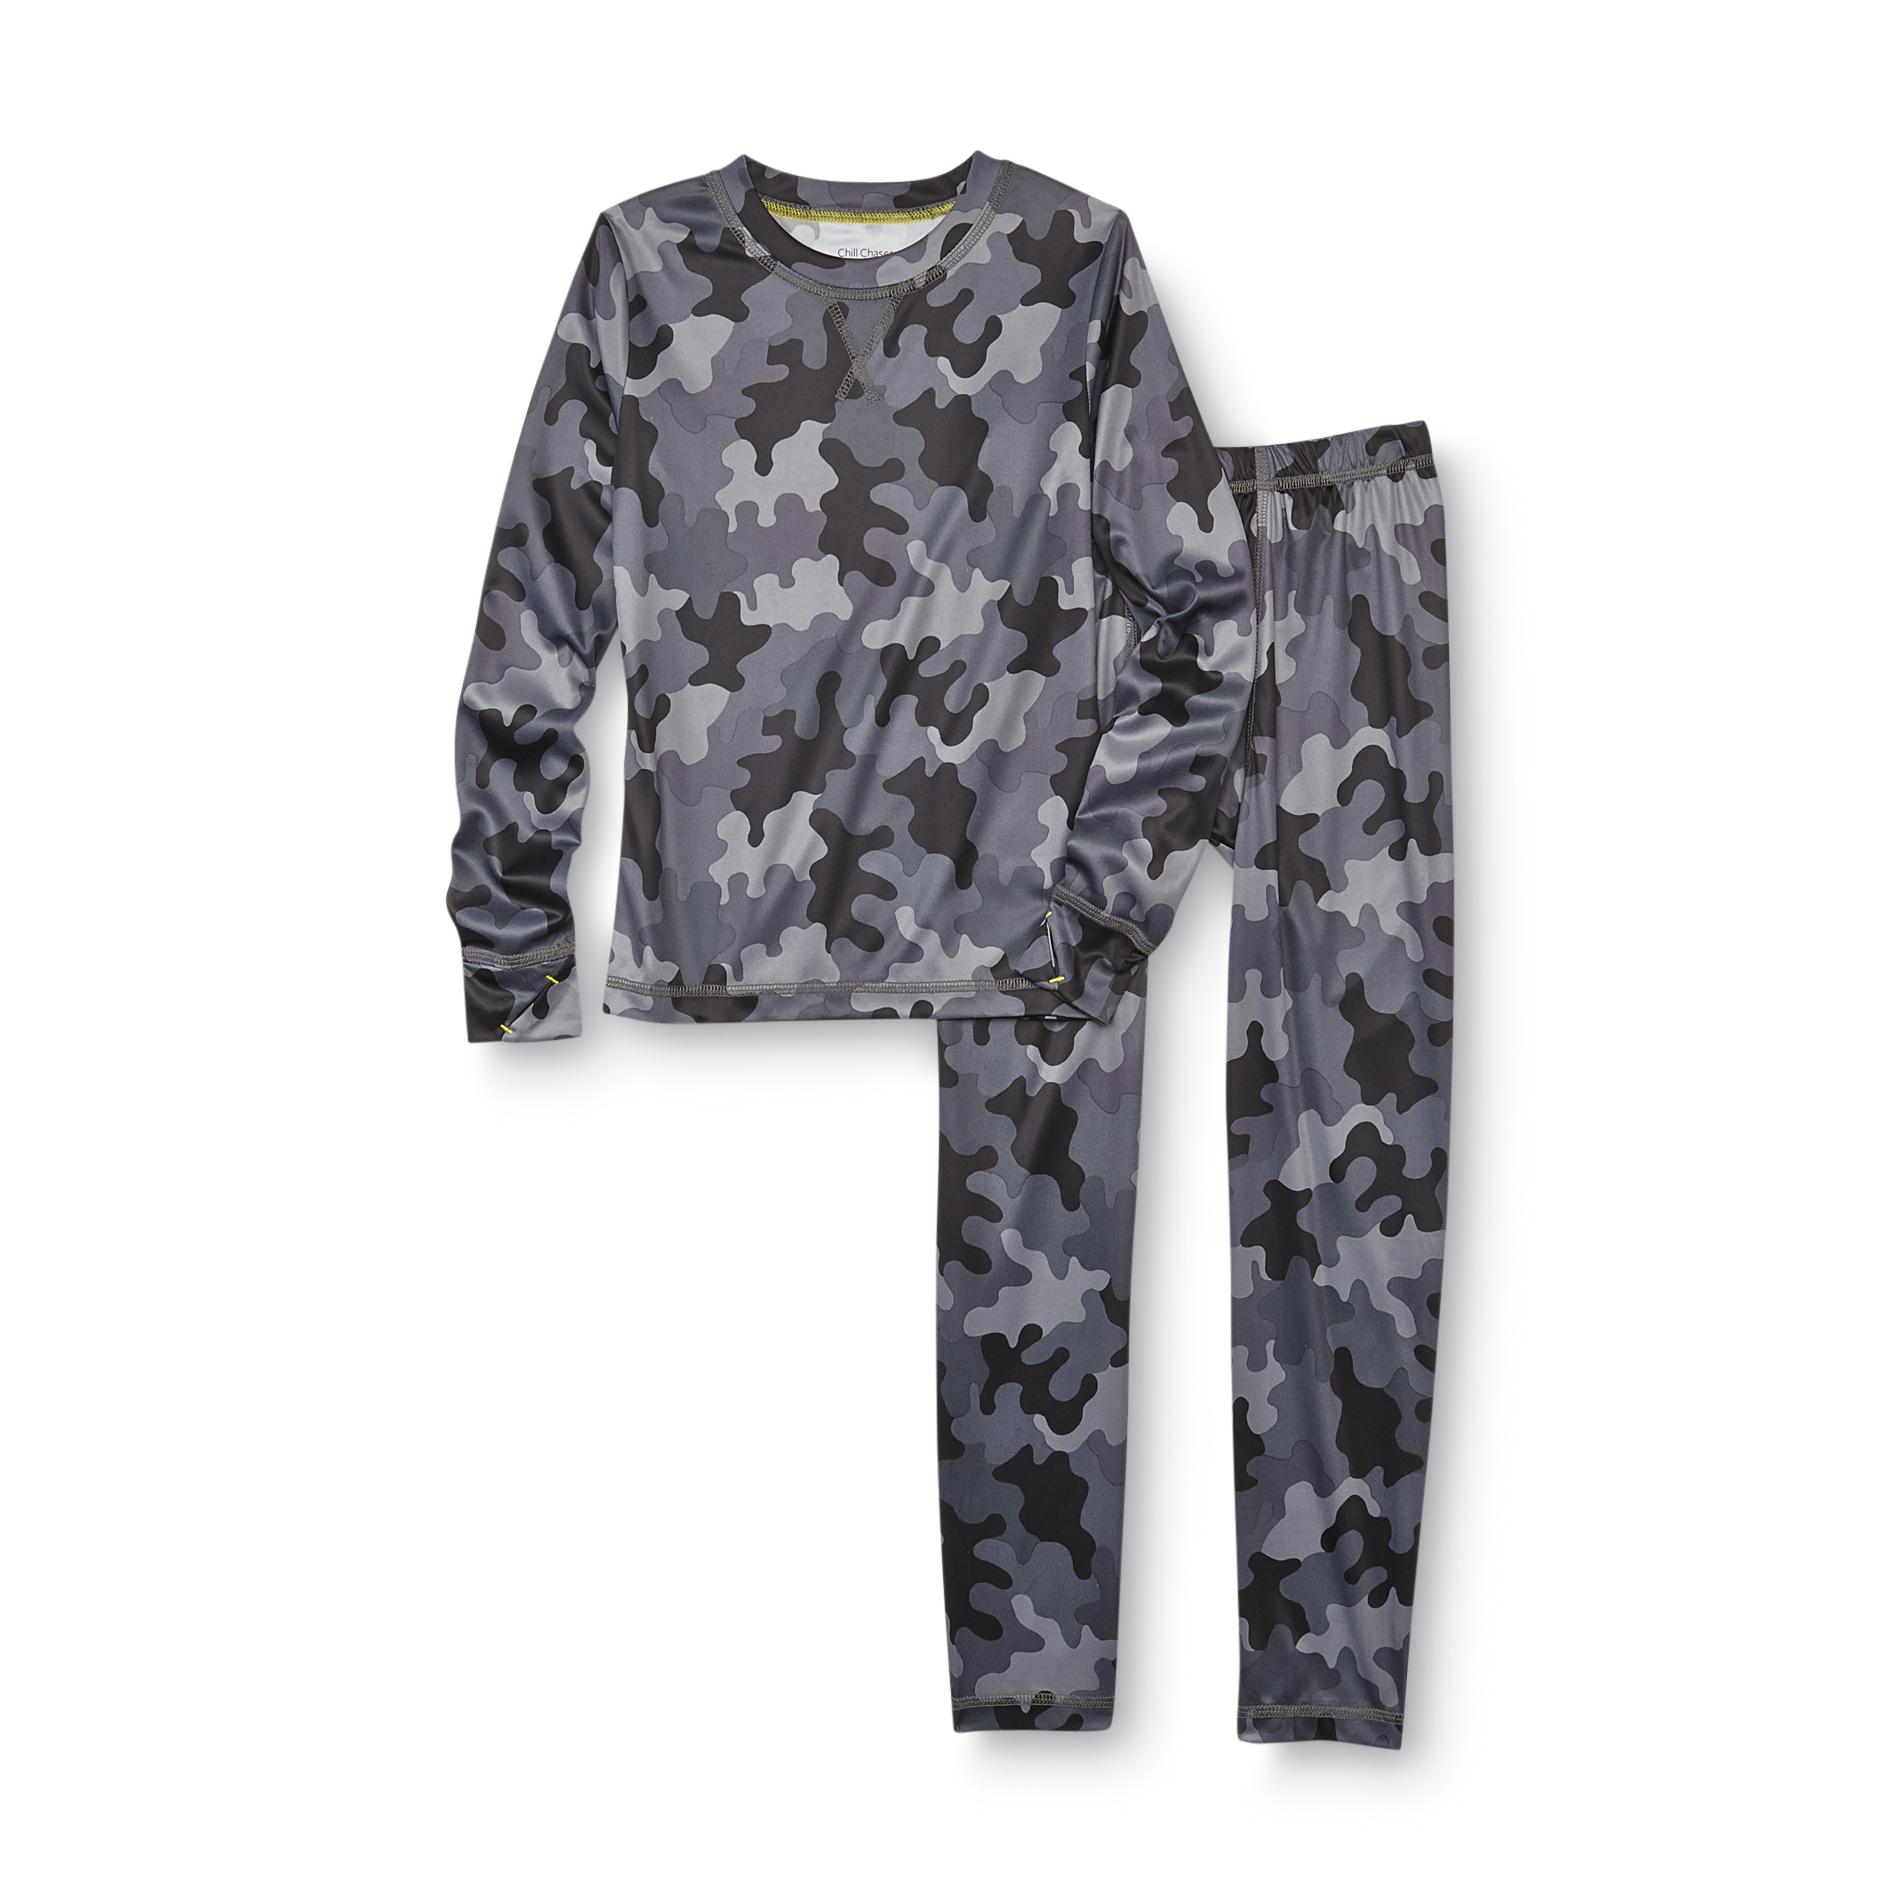 Chill Chasers Boy's Long-Sleeve Thermal Shirt & Pants - Camouflage